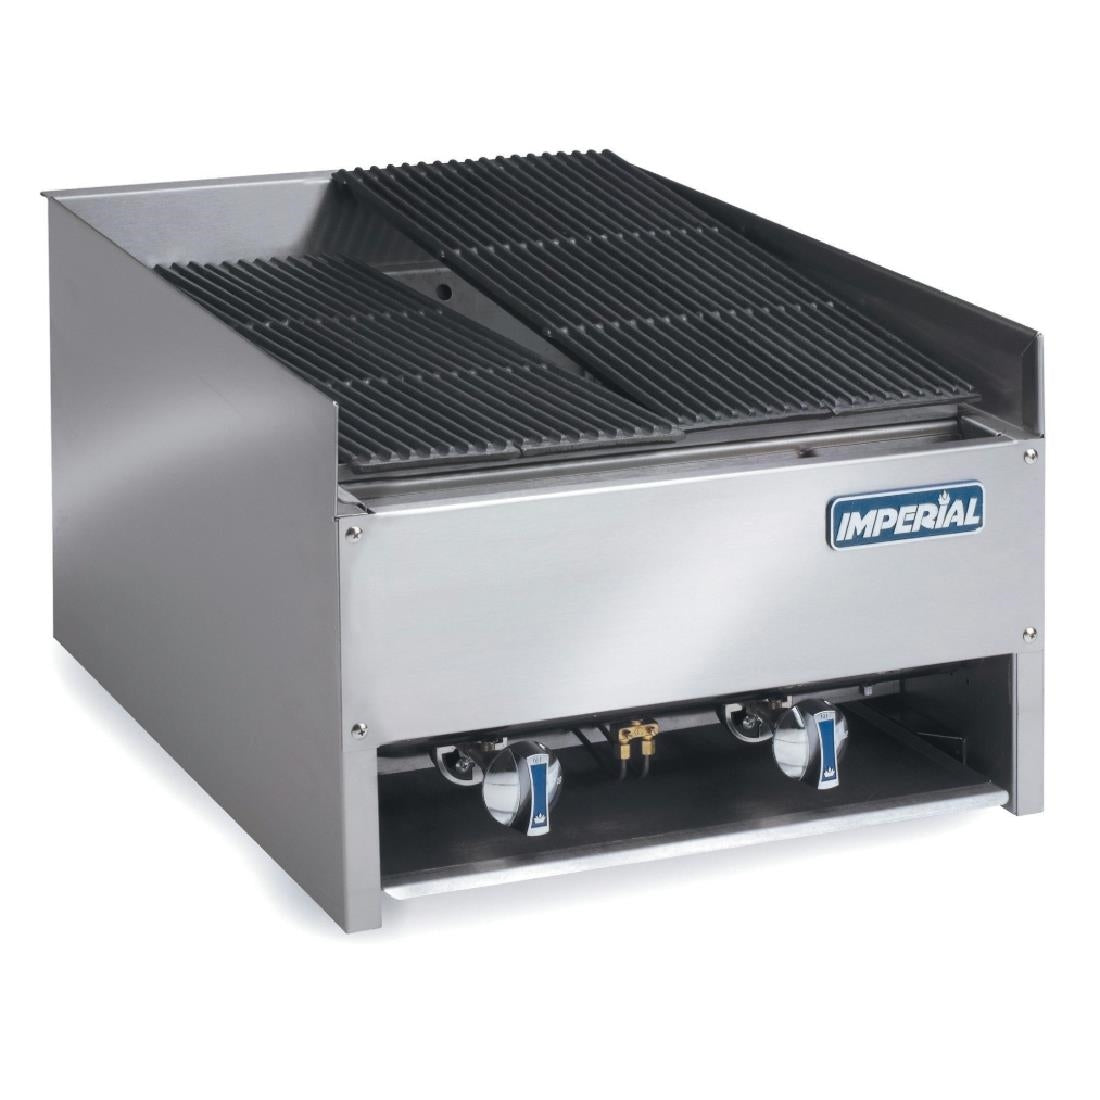 CX920 Imperial Char-Rock Chargrill LPG EBA-2223 JD Catering Equipment Solutions Ltd